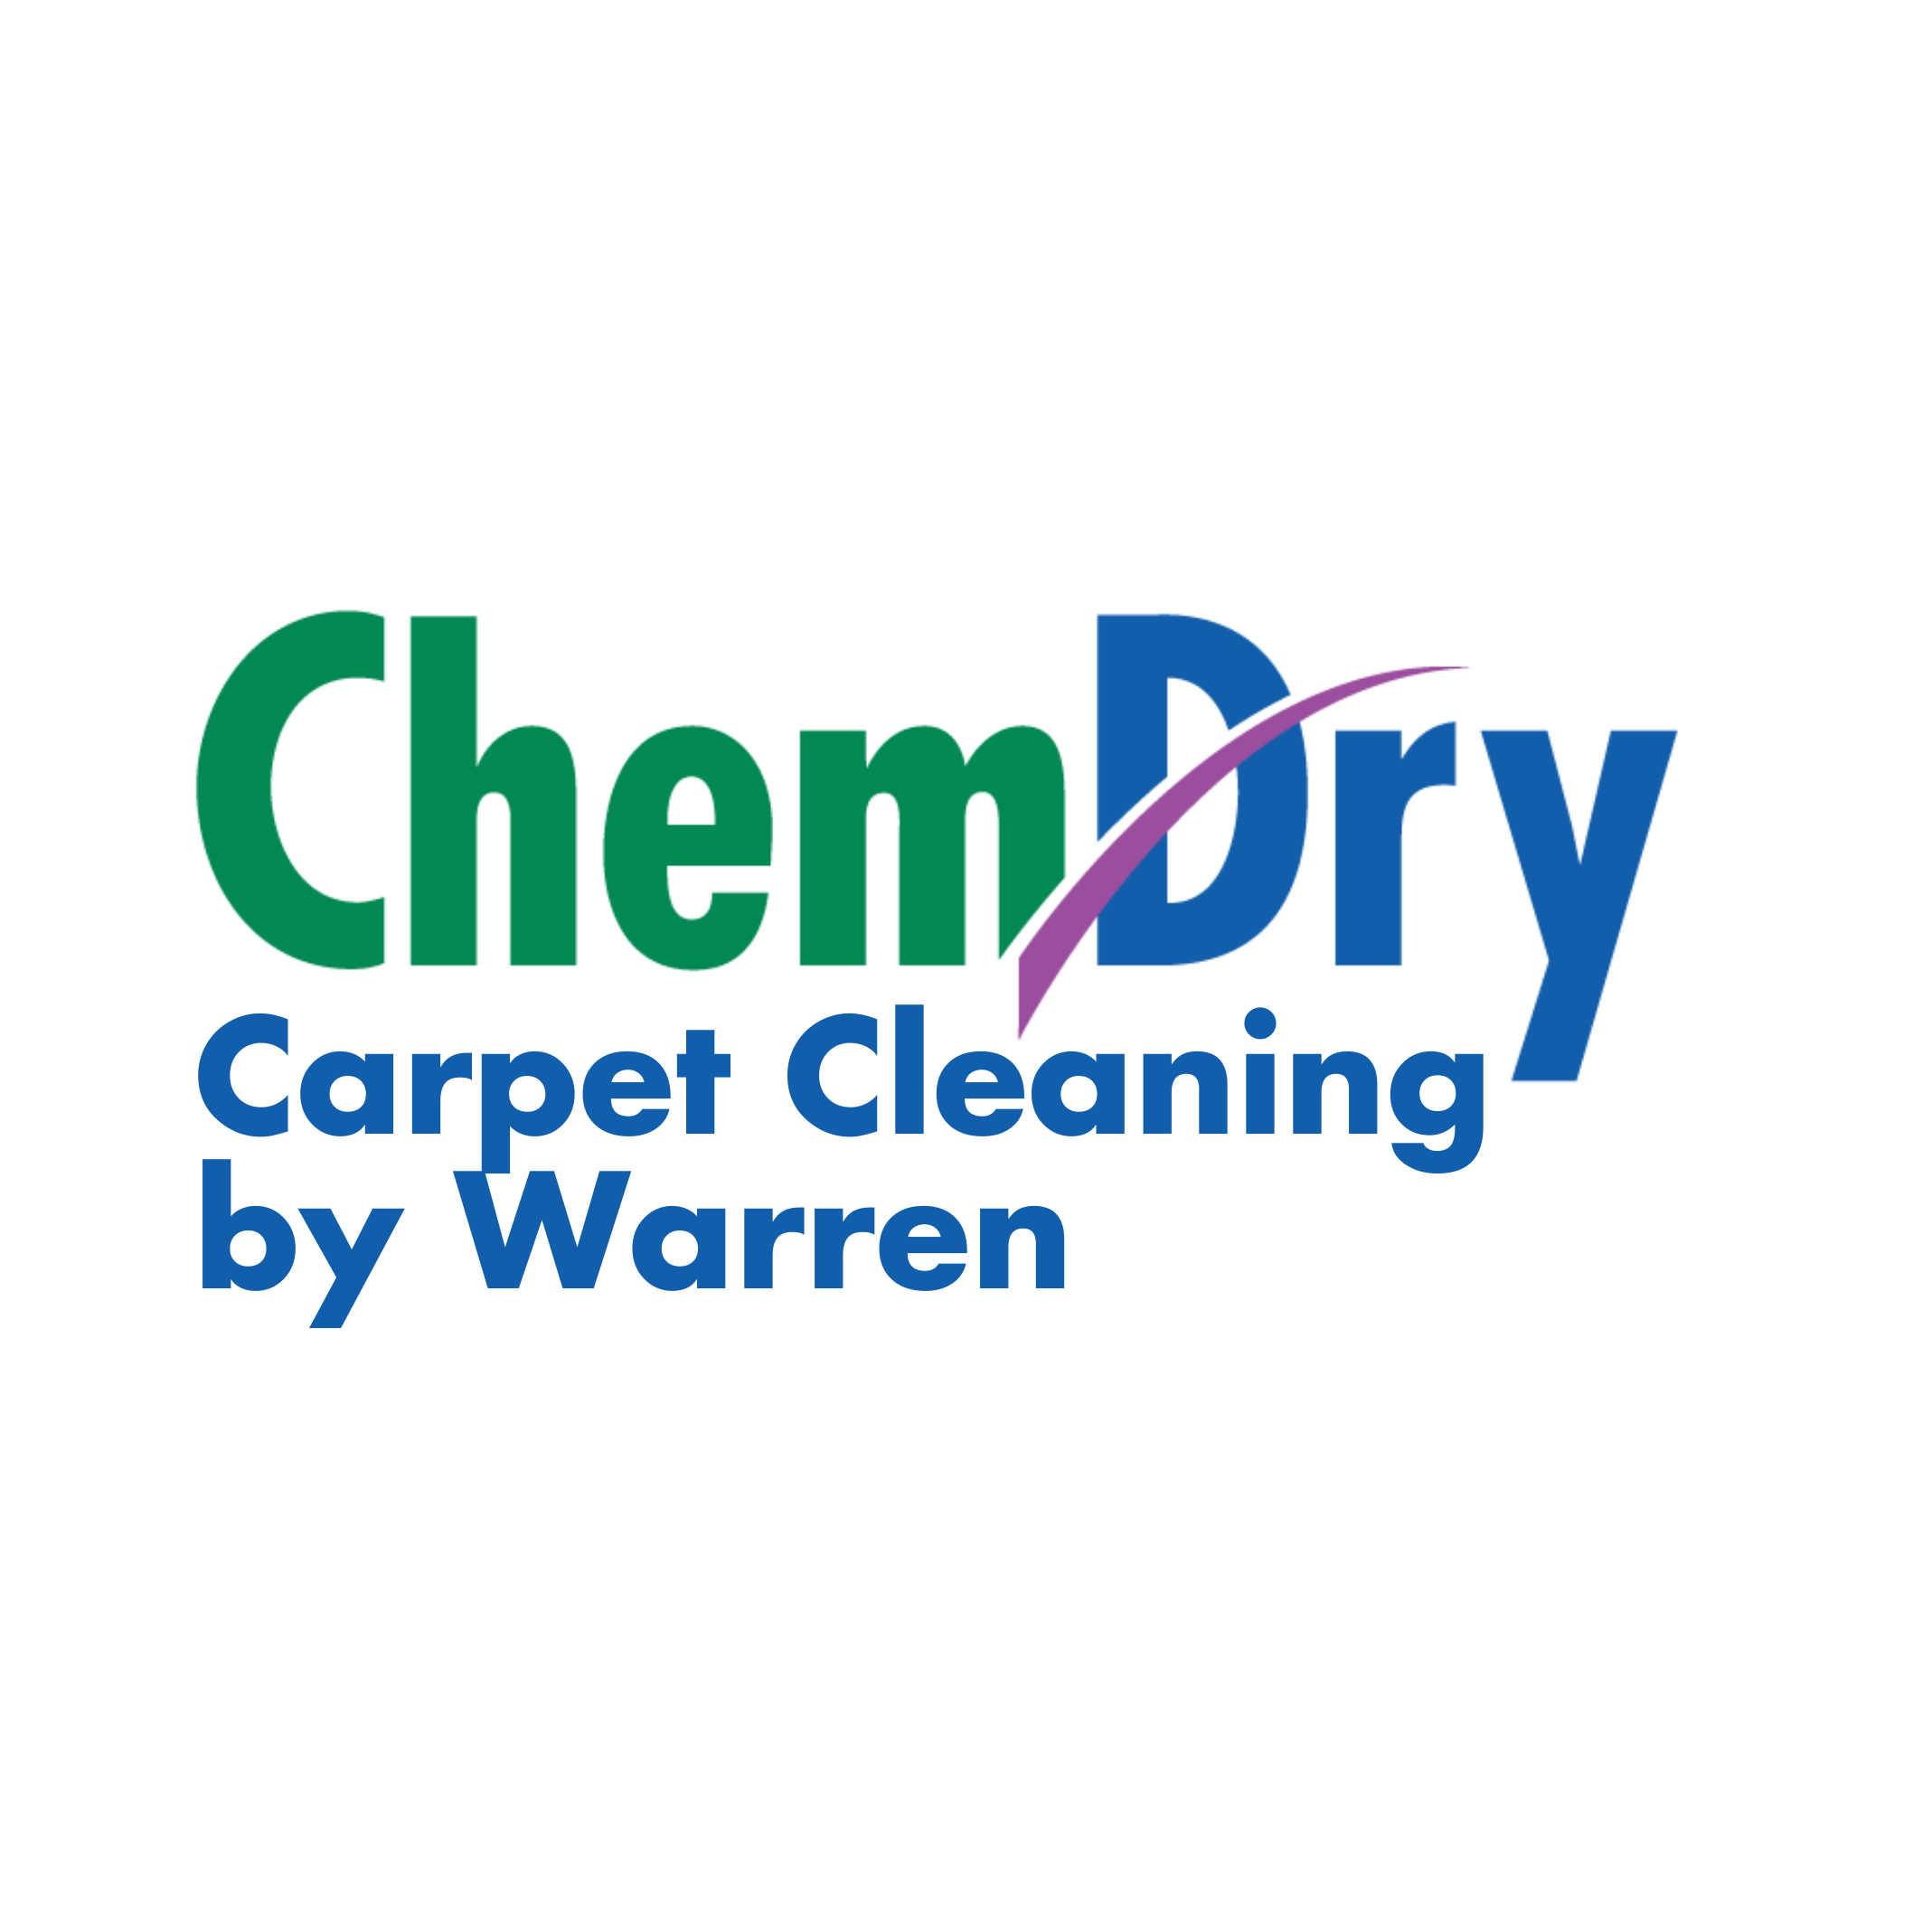 Chem-Dry Carpet Cleaning by Warren - Naples, FL - (239)455-7452 | ShowMeLocal.com